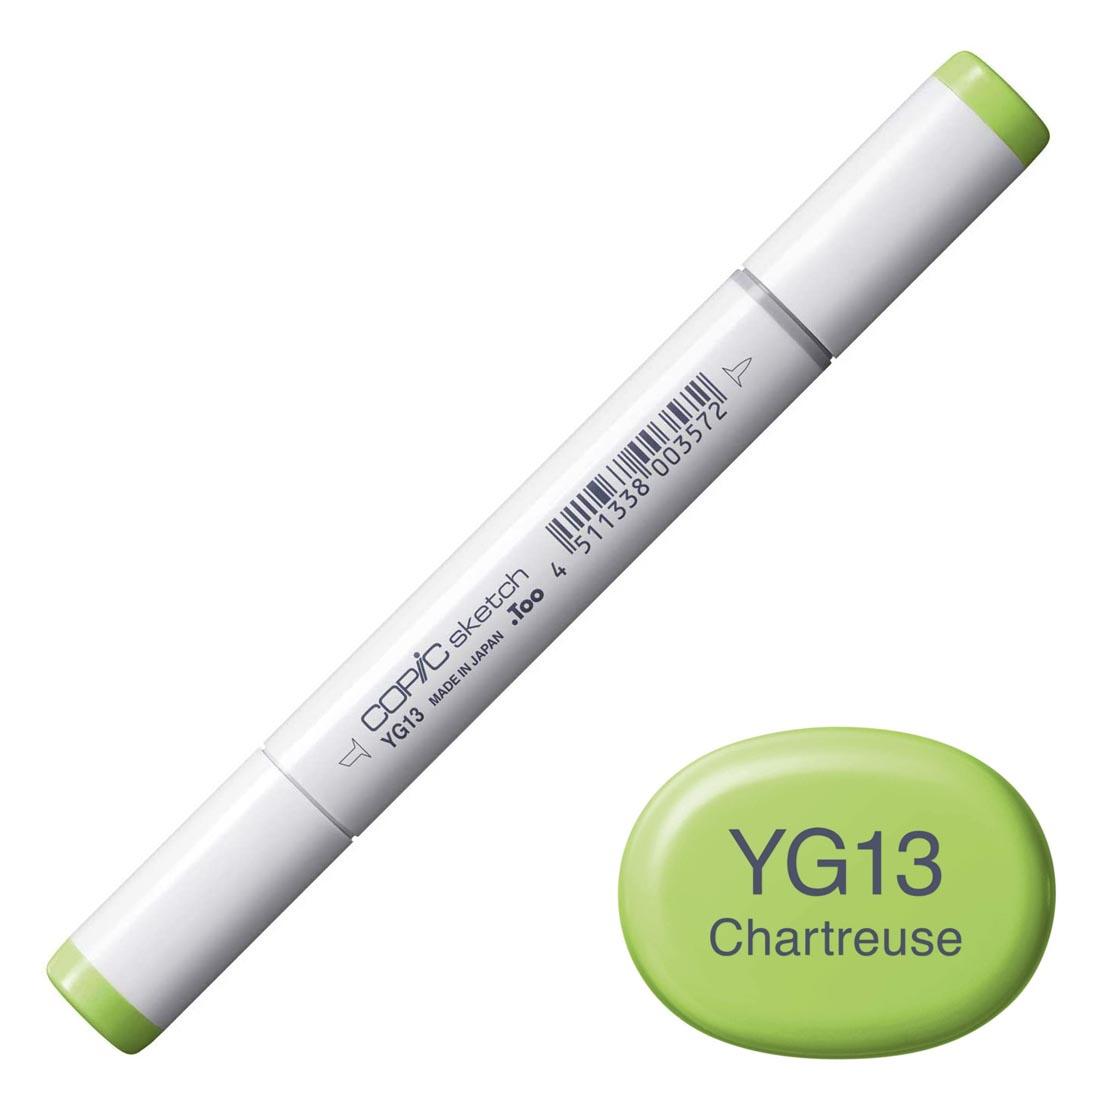 COPIC Sketch Marker with a color swatch and text of YG13 Chartreuse